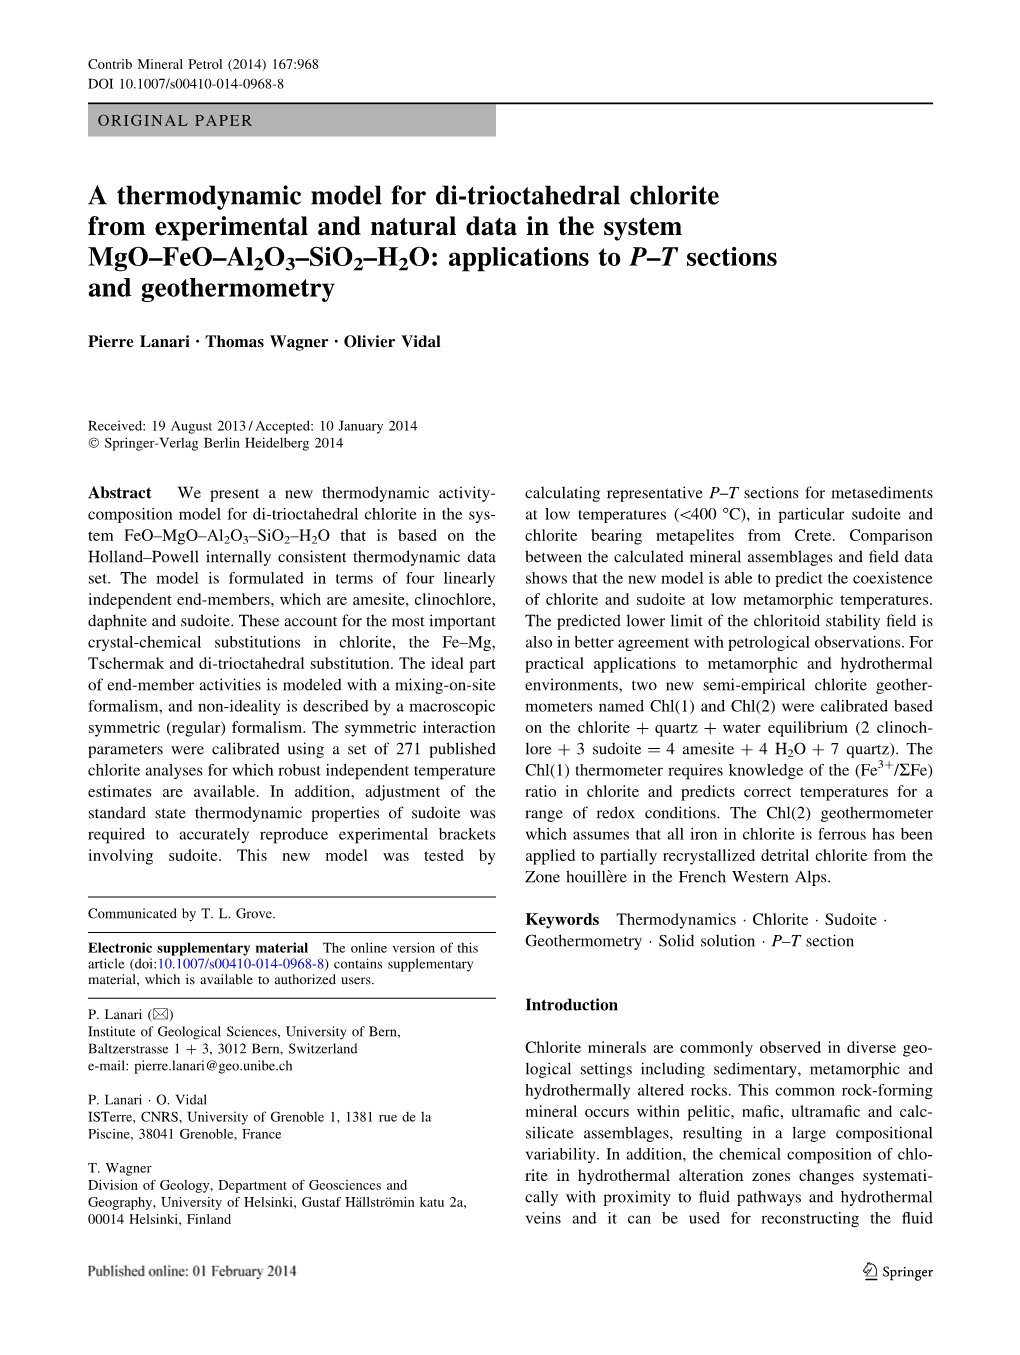 A Thermodynamic Model for Di-Trioctahedral Chlorite From